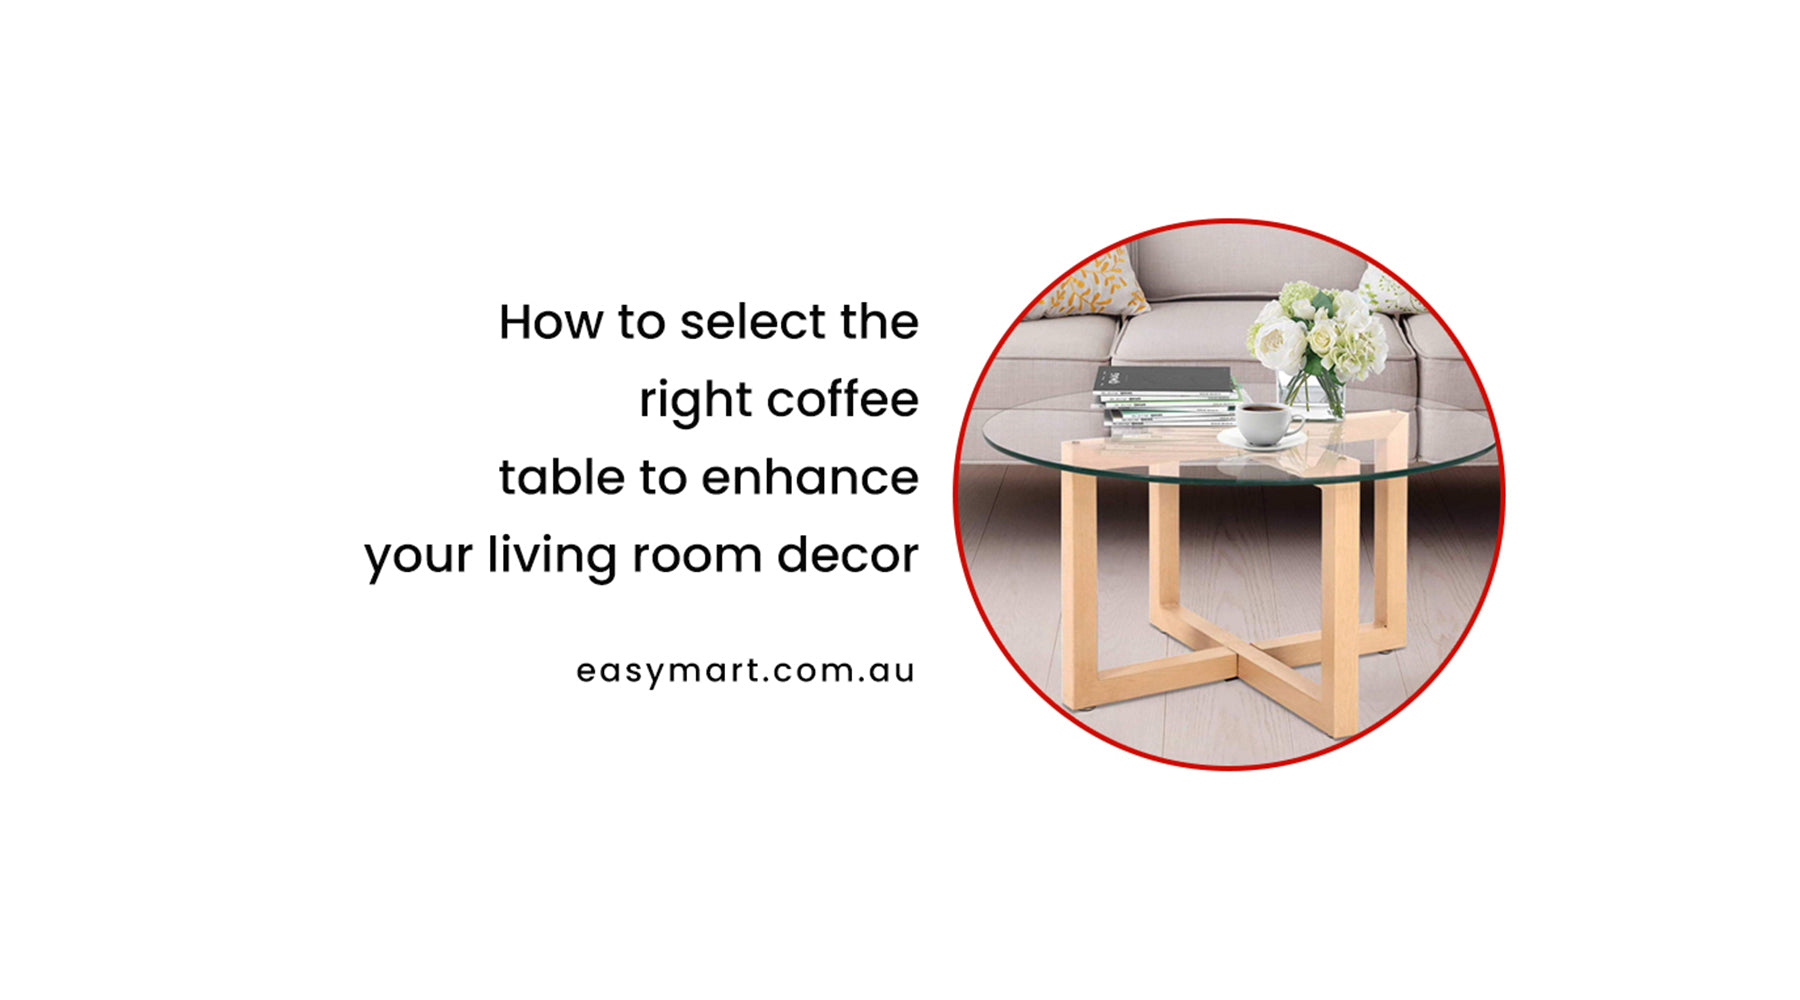 How to select the right coffee table to enhance your living room décor